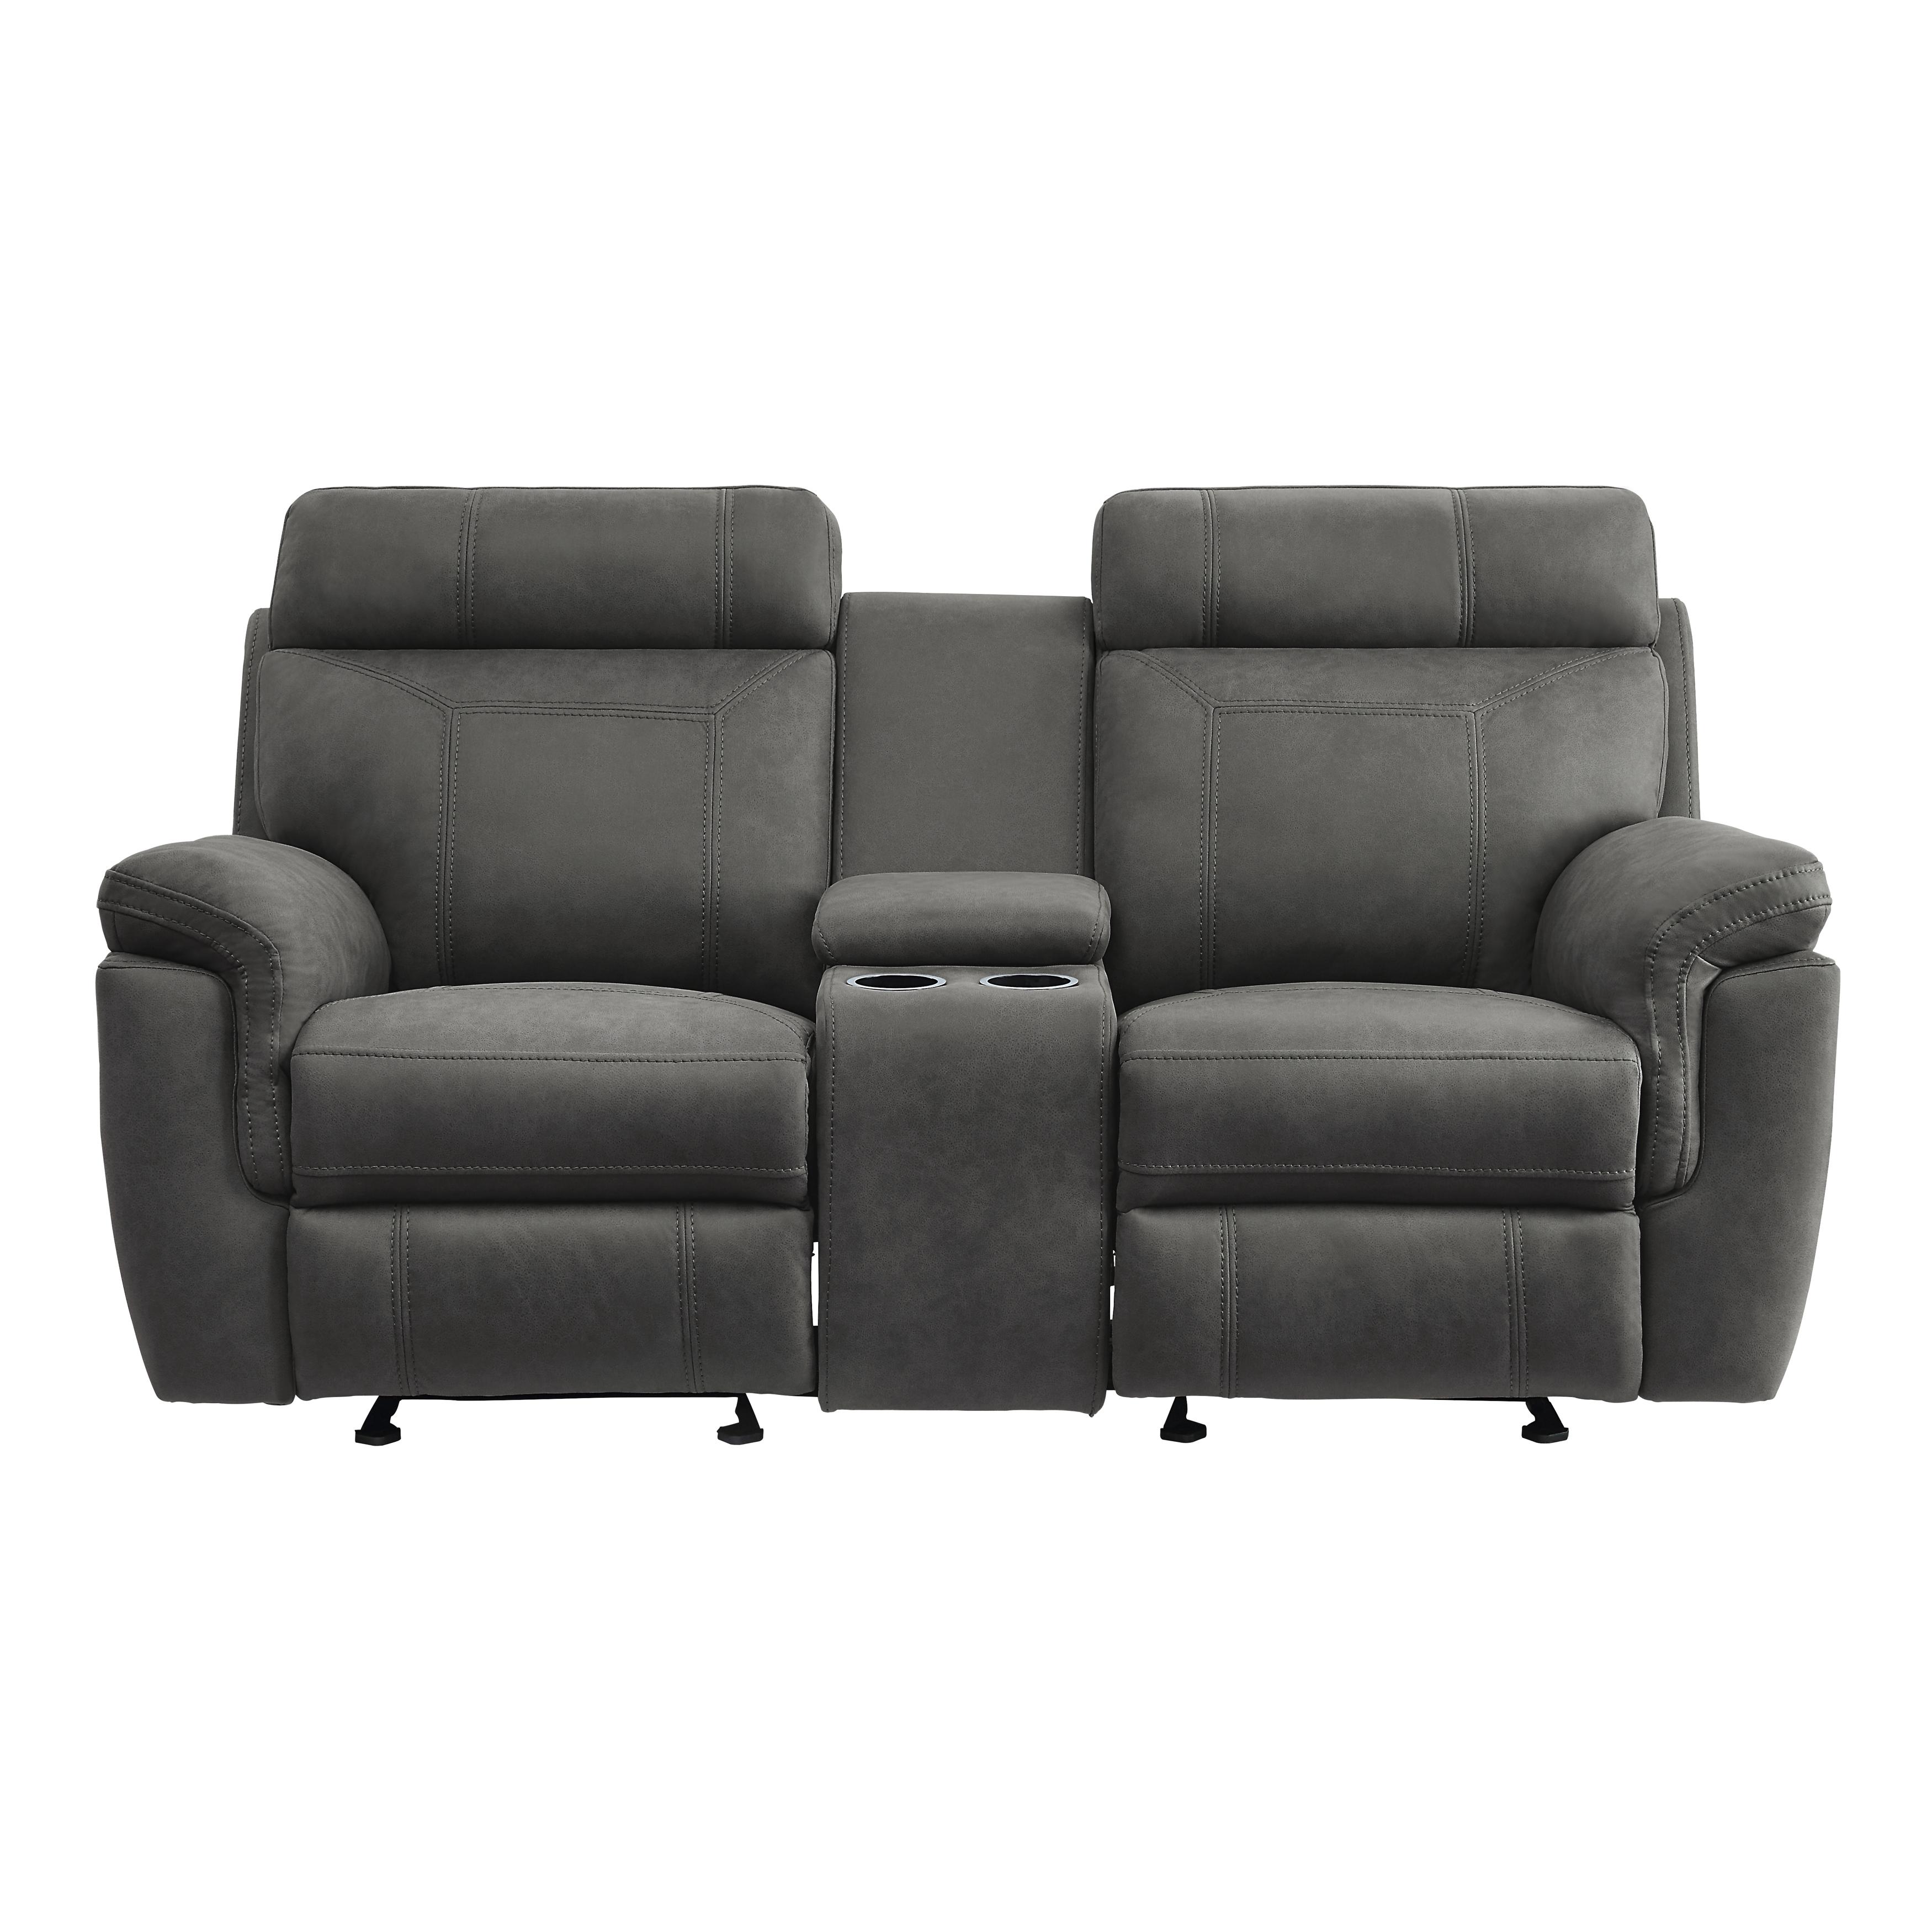 Modern Reclining Loveseat 9301GRY-2 Clifton 9301GRY-2 in Gray Microfiber